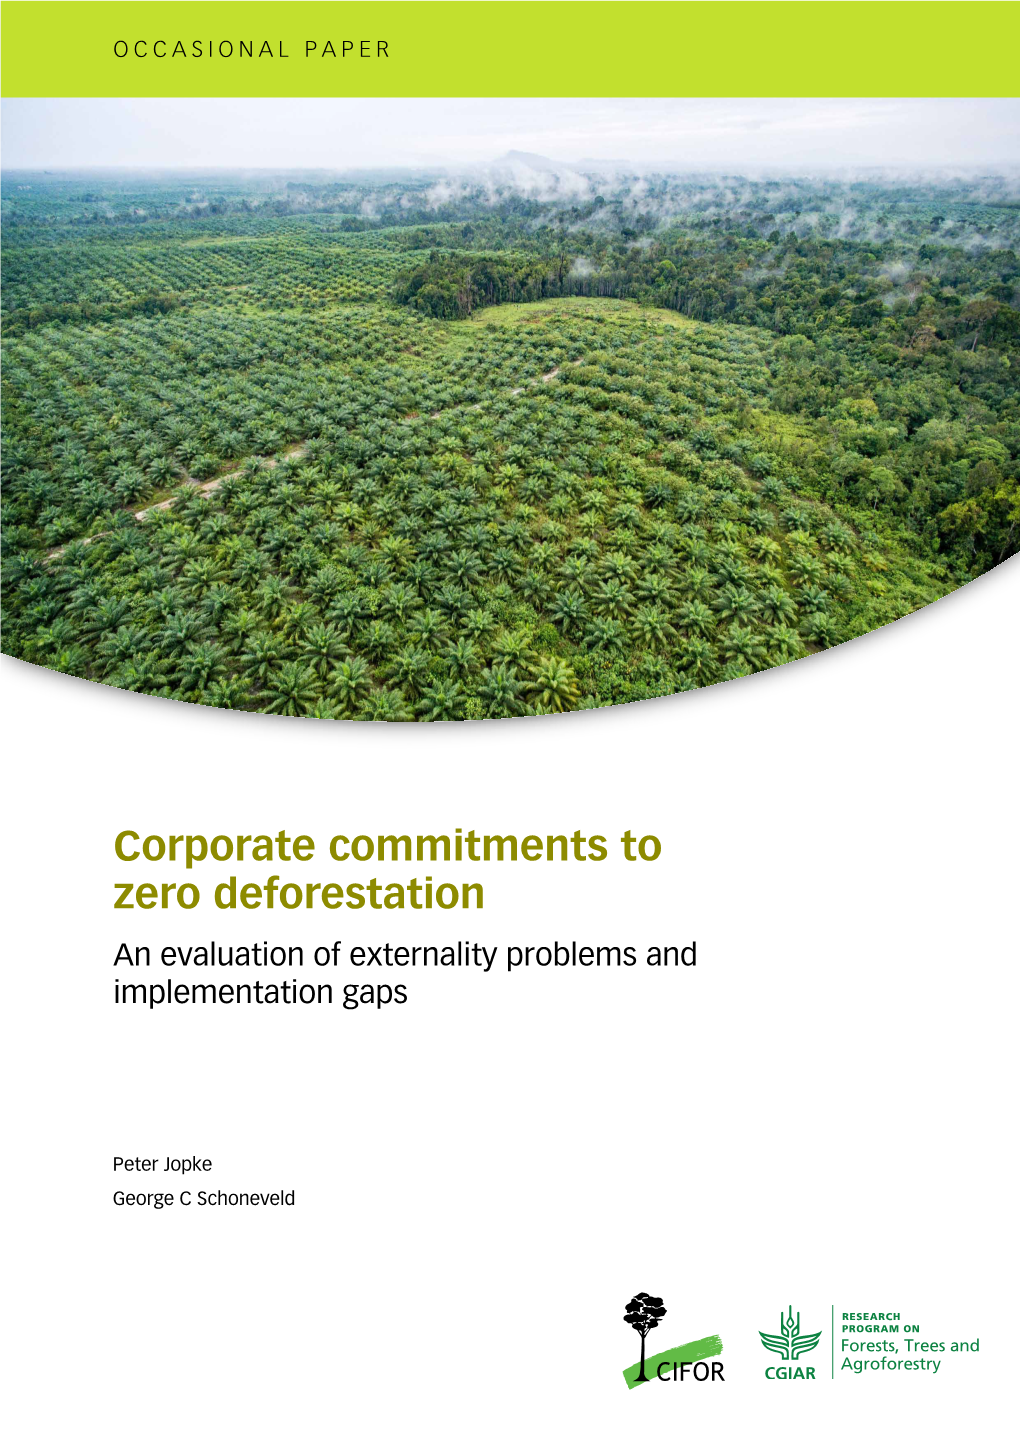 Corporate Commitments to Zero Deforestation an Evaluation of Externality Problems and Implementation Gaps